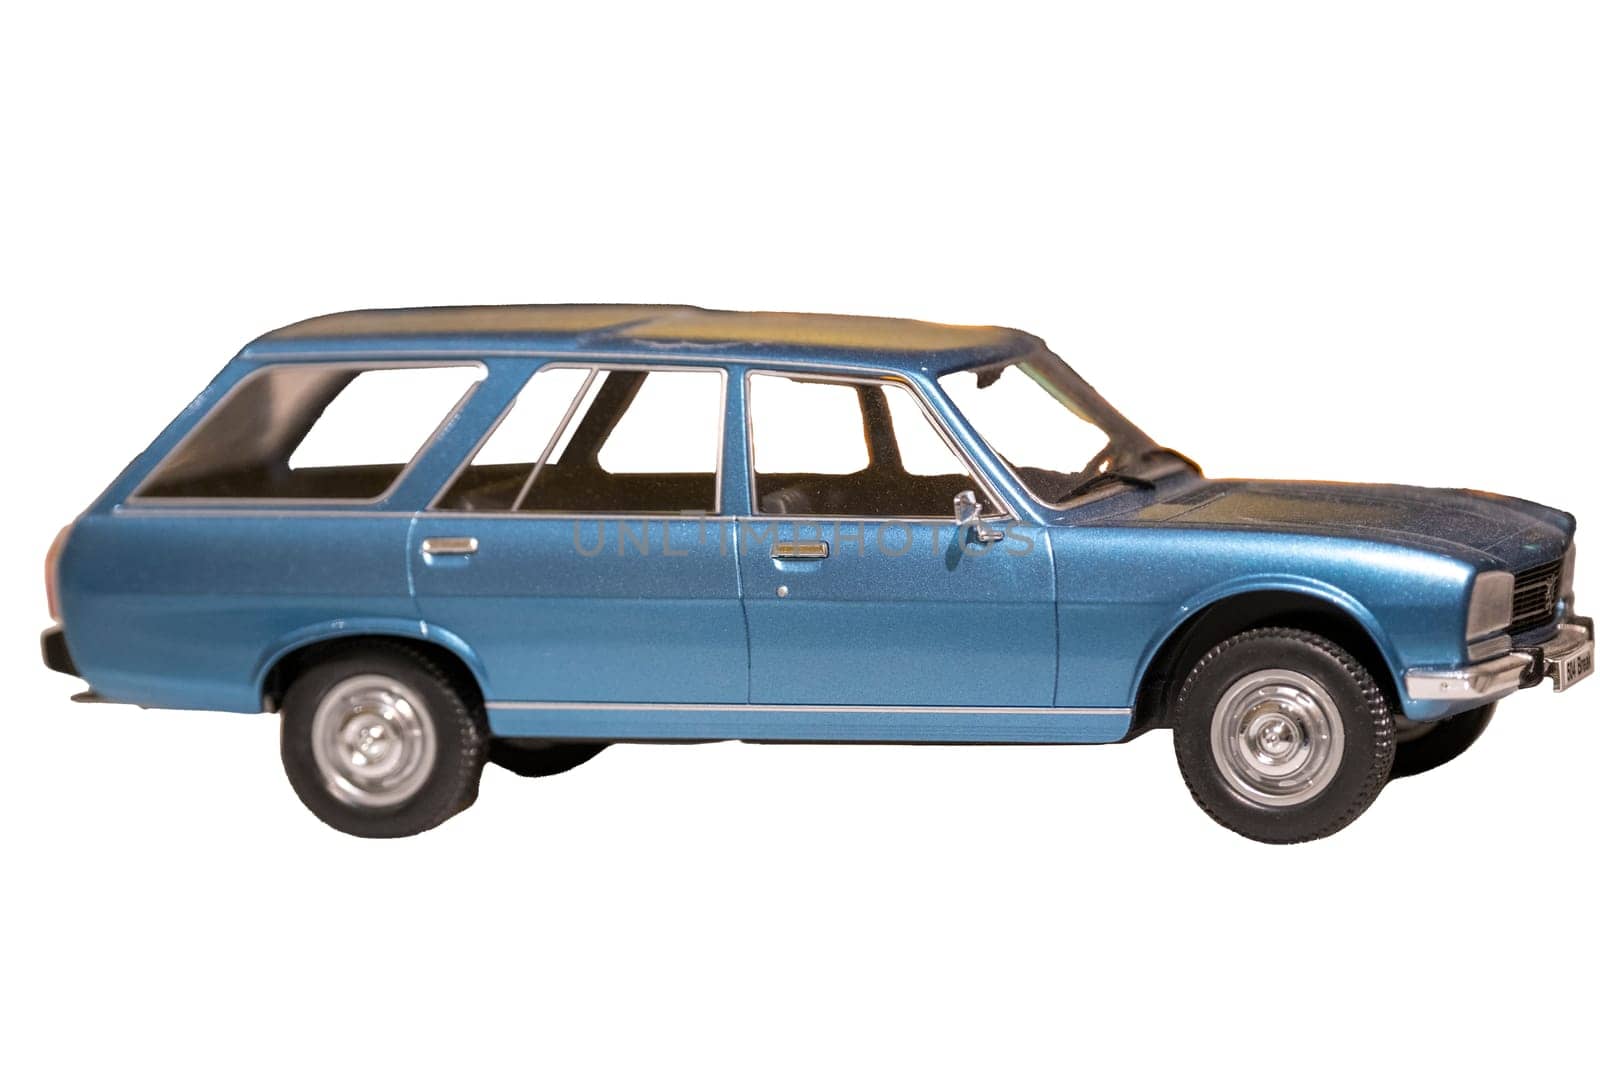 Image of an old, vintage blue station wagon model car isolated on white with a clipping path. High quality photo. Focus on foreground